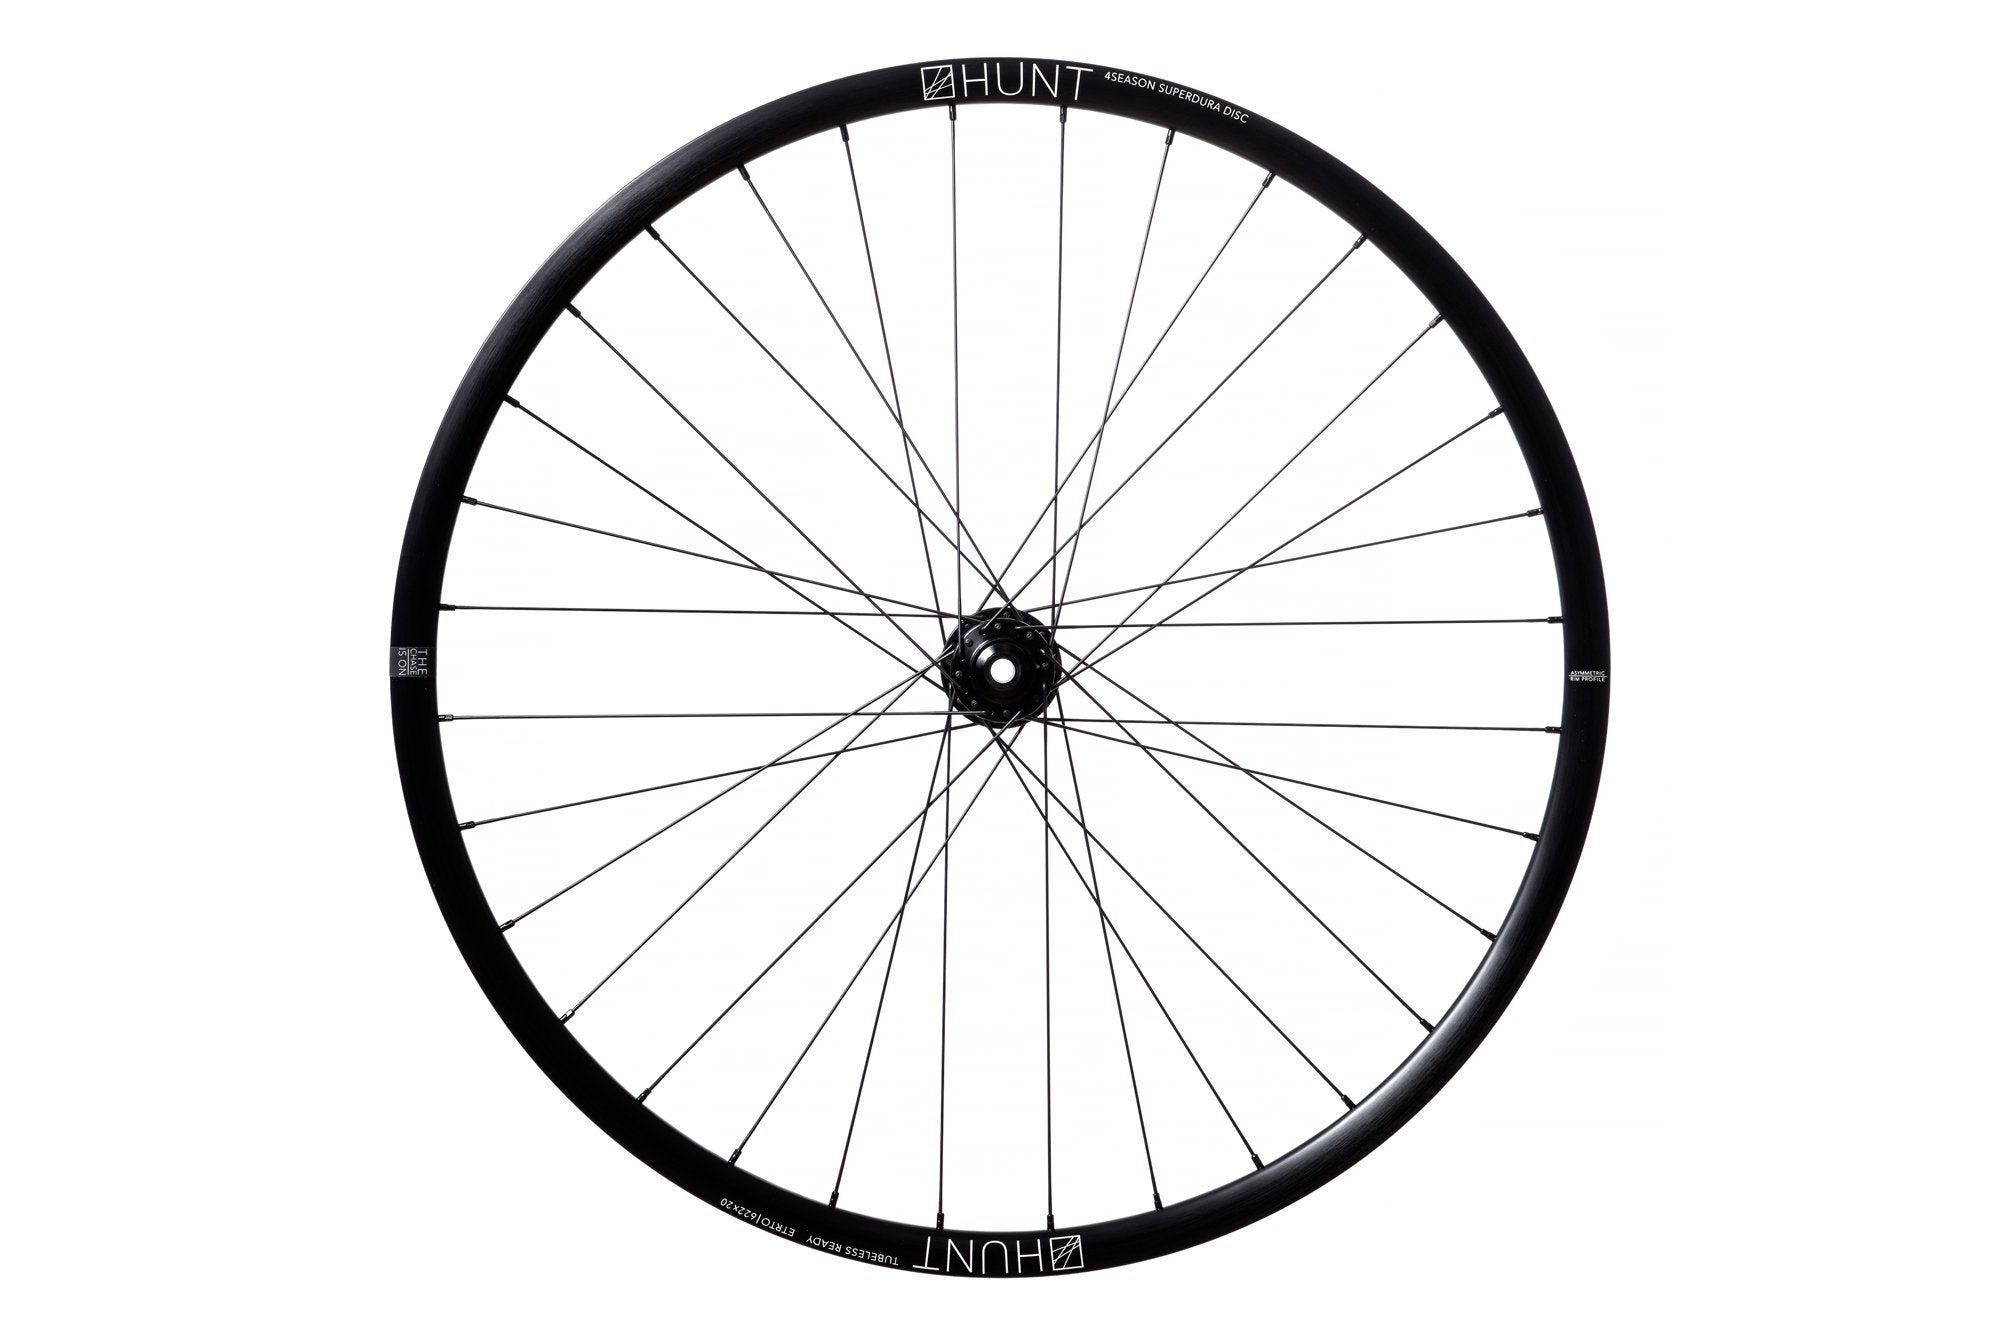 <h1>Rims</h1><i>Extra strong 6069-T6 (+69% tensile strength vs 6061-T6) heat-treated rim, featuring an asymmetric shape, provides balanced higher spoke tensions meaning your spokes stay tight for the long term. The rim profile is disc specific which allows higher-strength to weight as no reinforcement is required for a braking surface. The extra wide rim at 24mm (19mm int) creates a great tyre profile with wider 25-50mm tires, giving excellent grip and lower rolling resistance.</i>